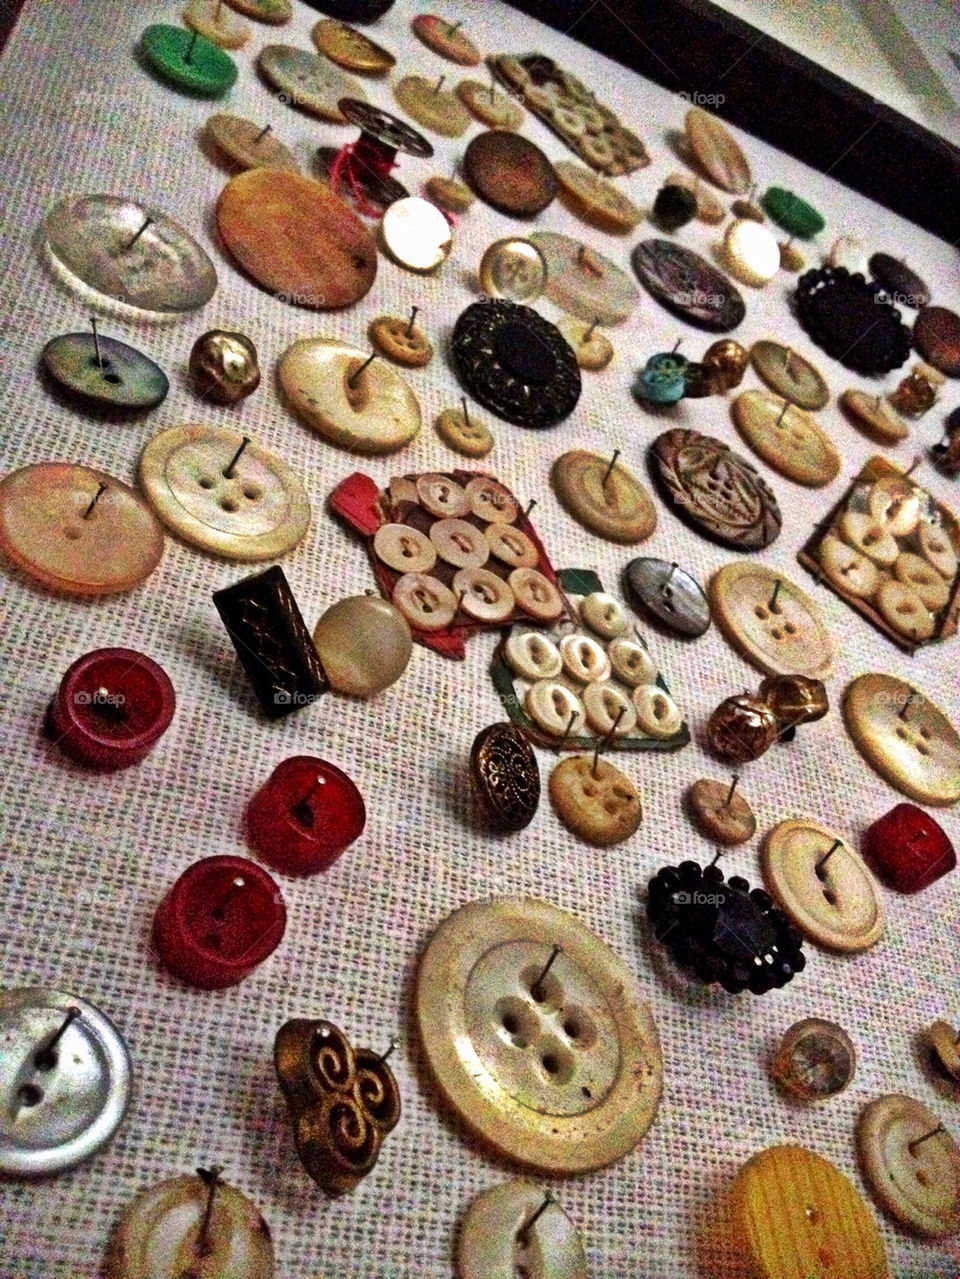 FOUR GENERATIONS OF SPARE BUTTONS